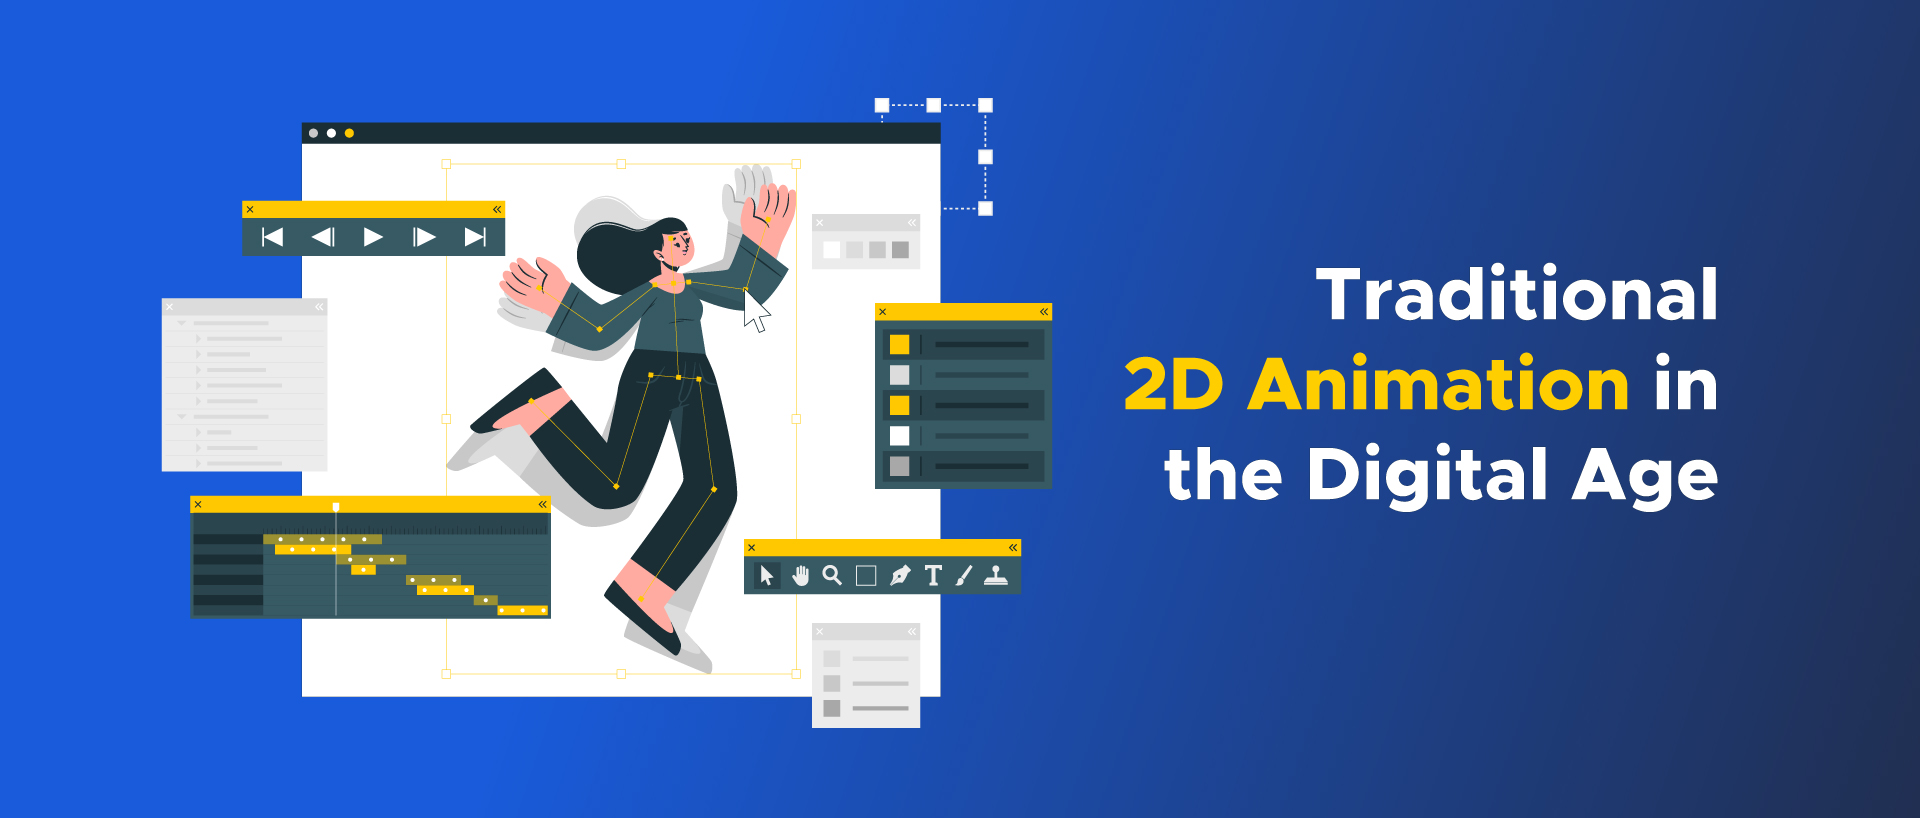 Explore the Significance of Traditional 2D Animation in the Digital Age